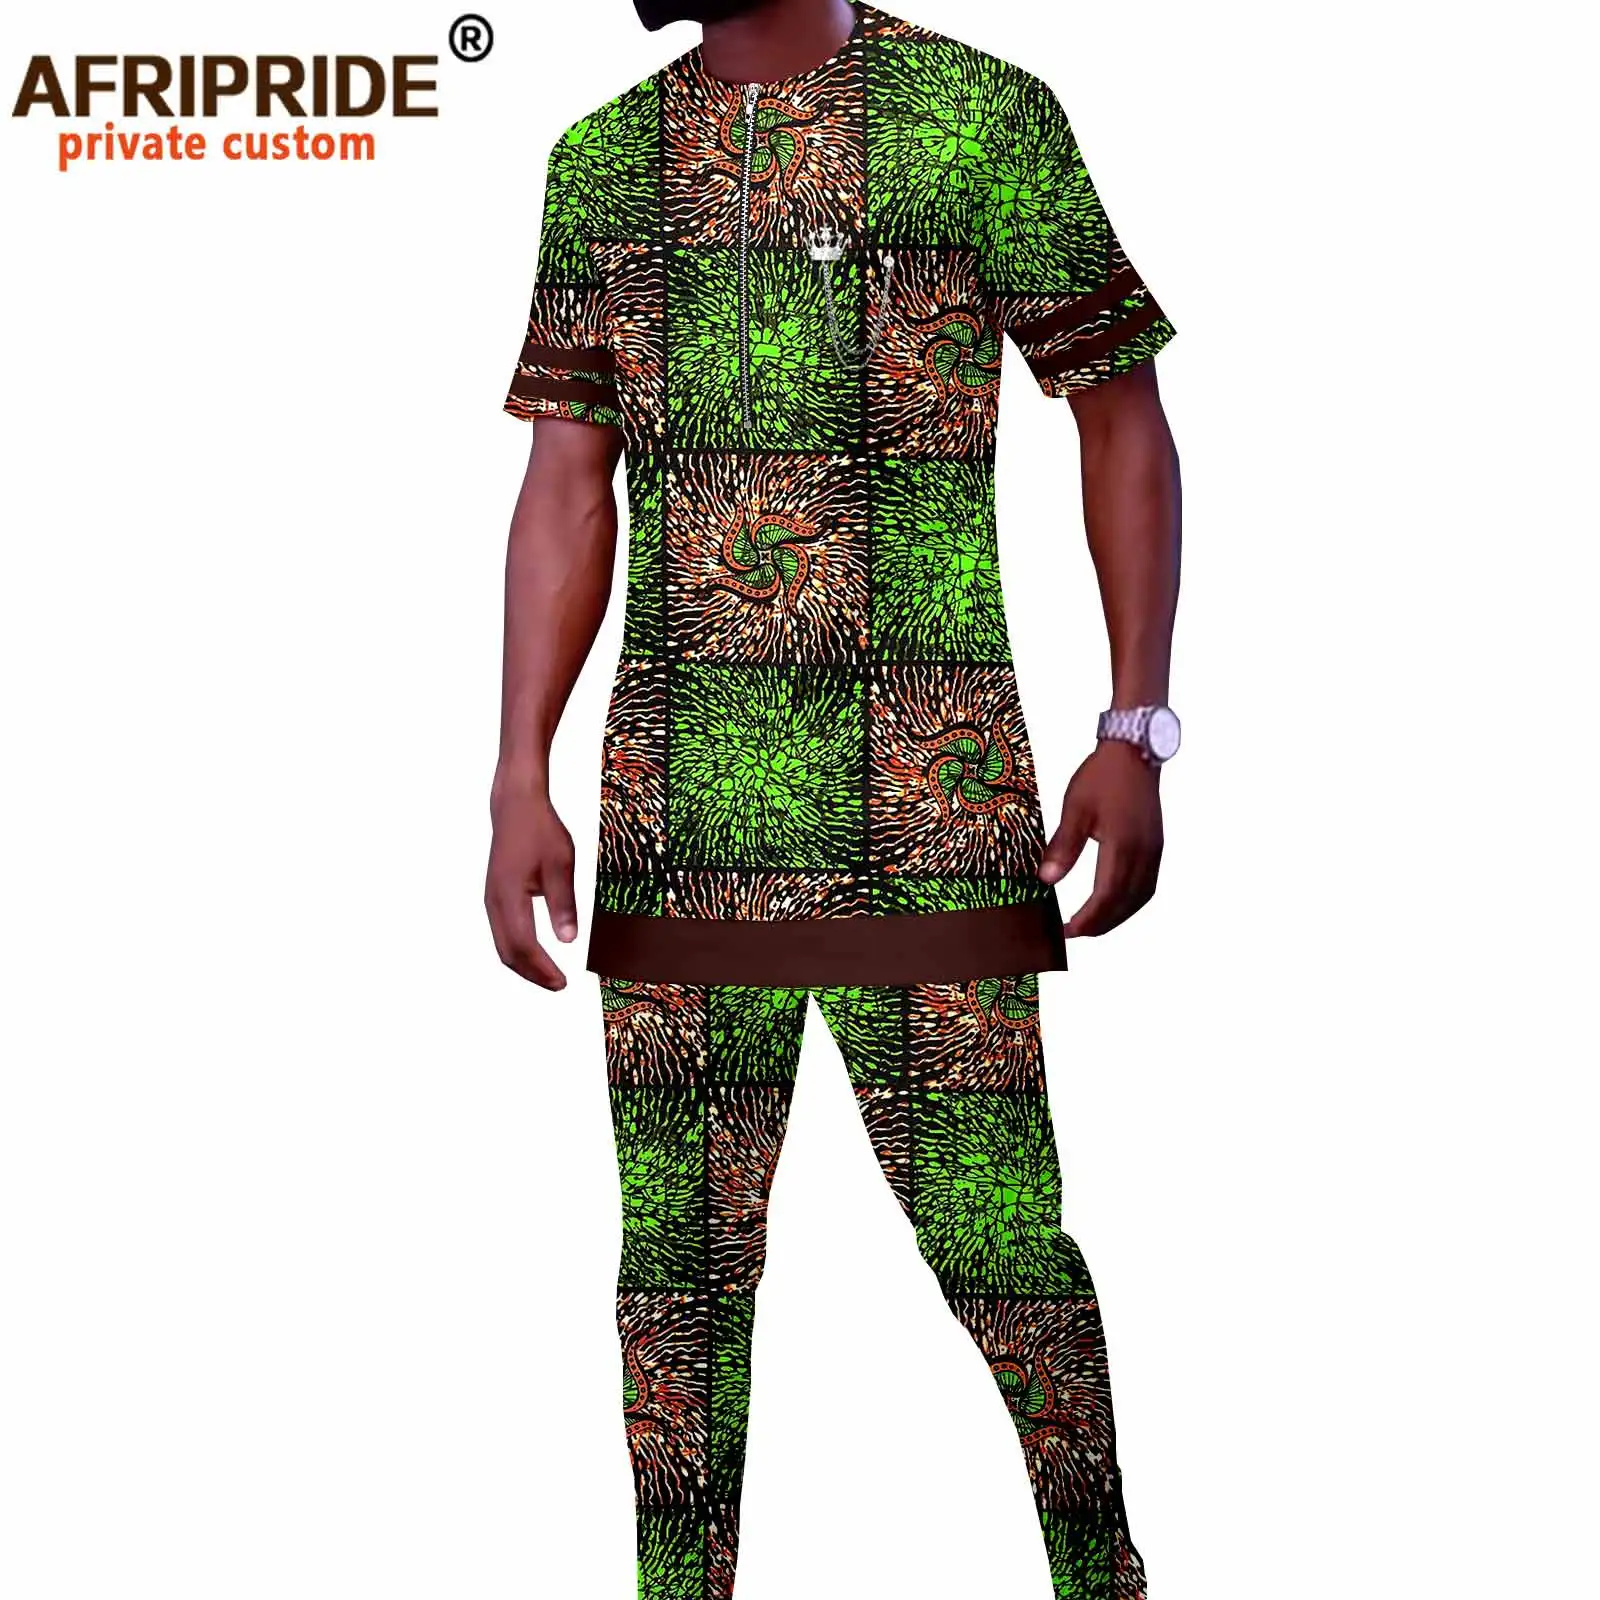 Tracksuit Men Dashiki African Clothing Short Sleeve Zip Blouse with Chains Print Shirts and Ankara Pants 2 Piece Set  A2116027